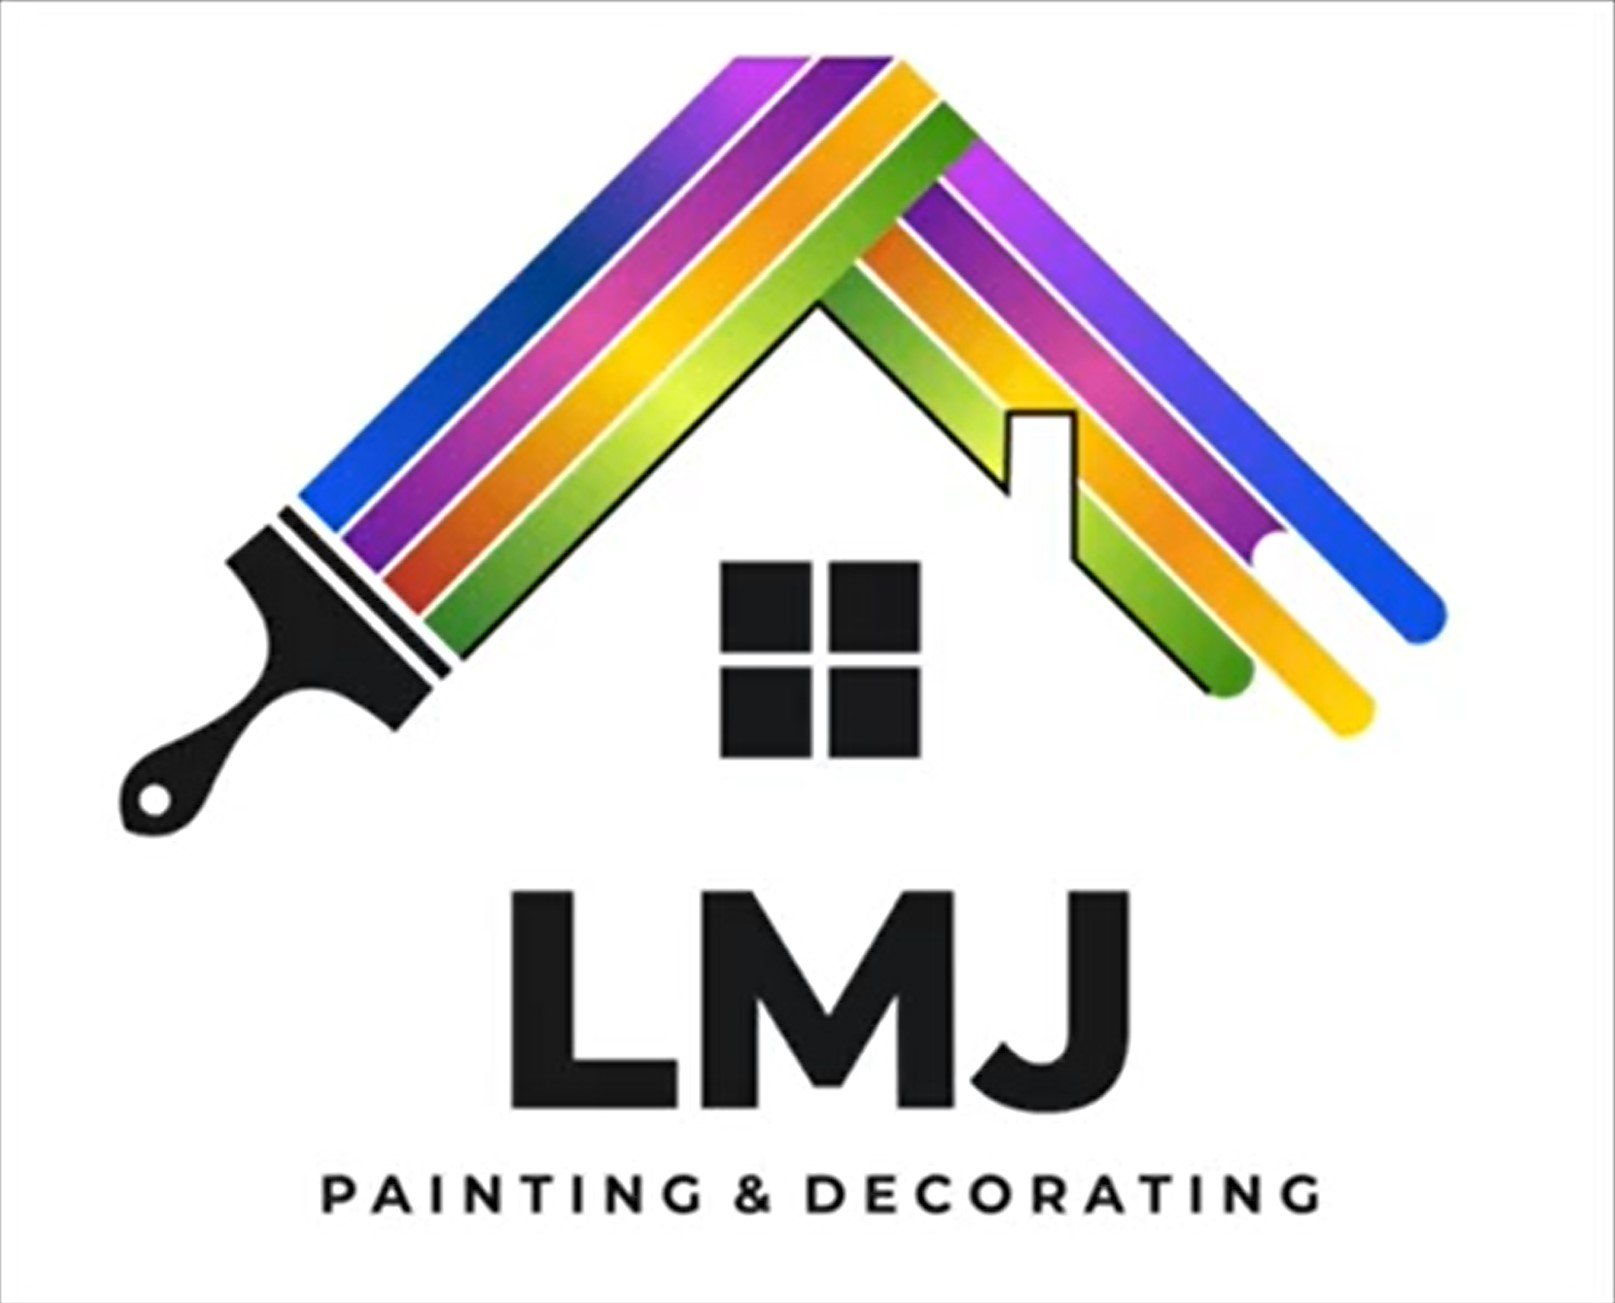 Paul The Painter Decorating Contractor | London